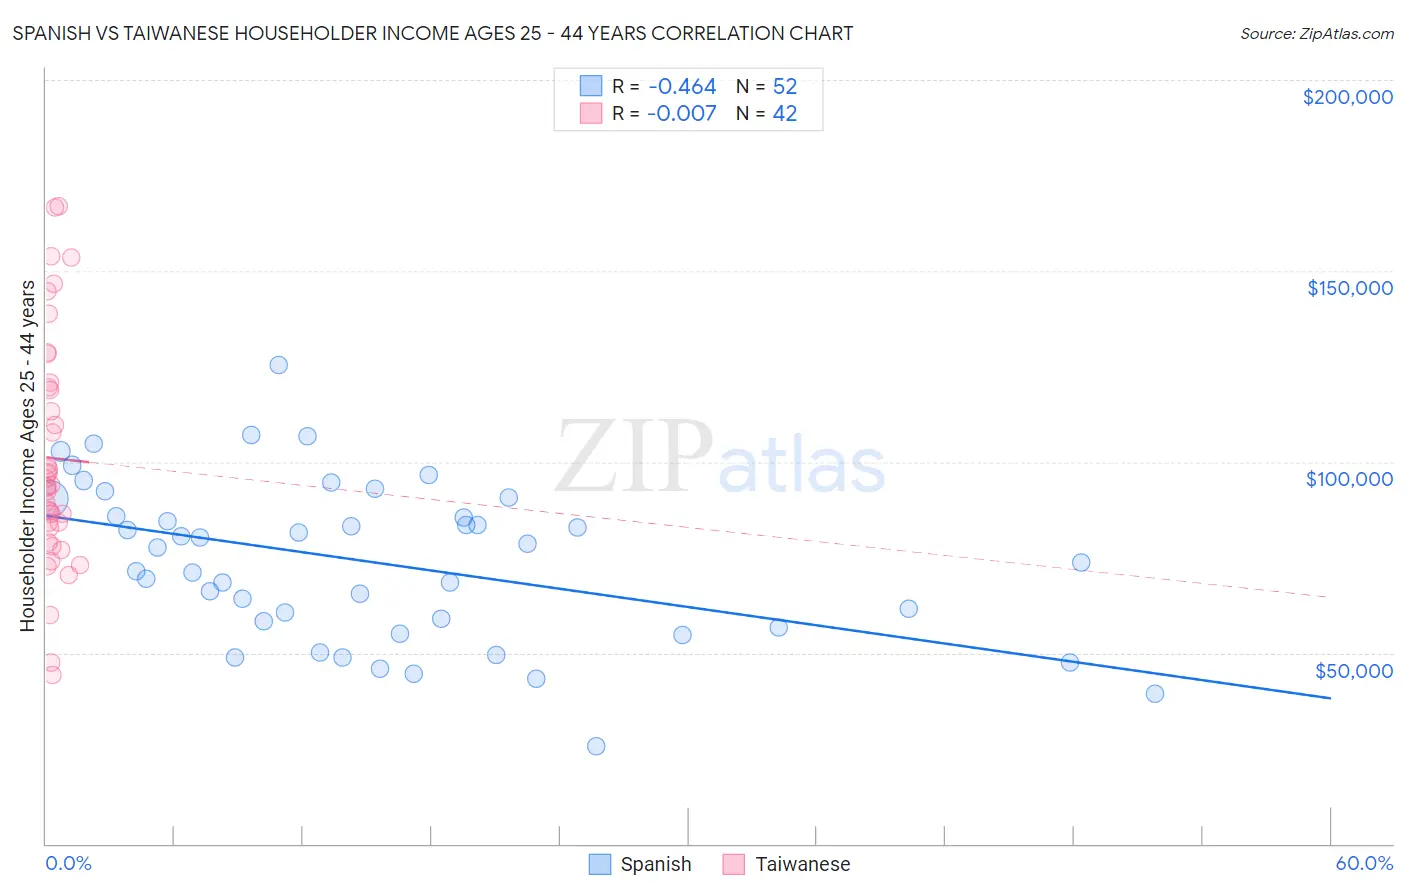 Spanish vs Taiwanese Householder Income Ages 25 - 44 years